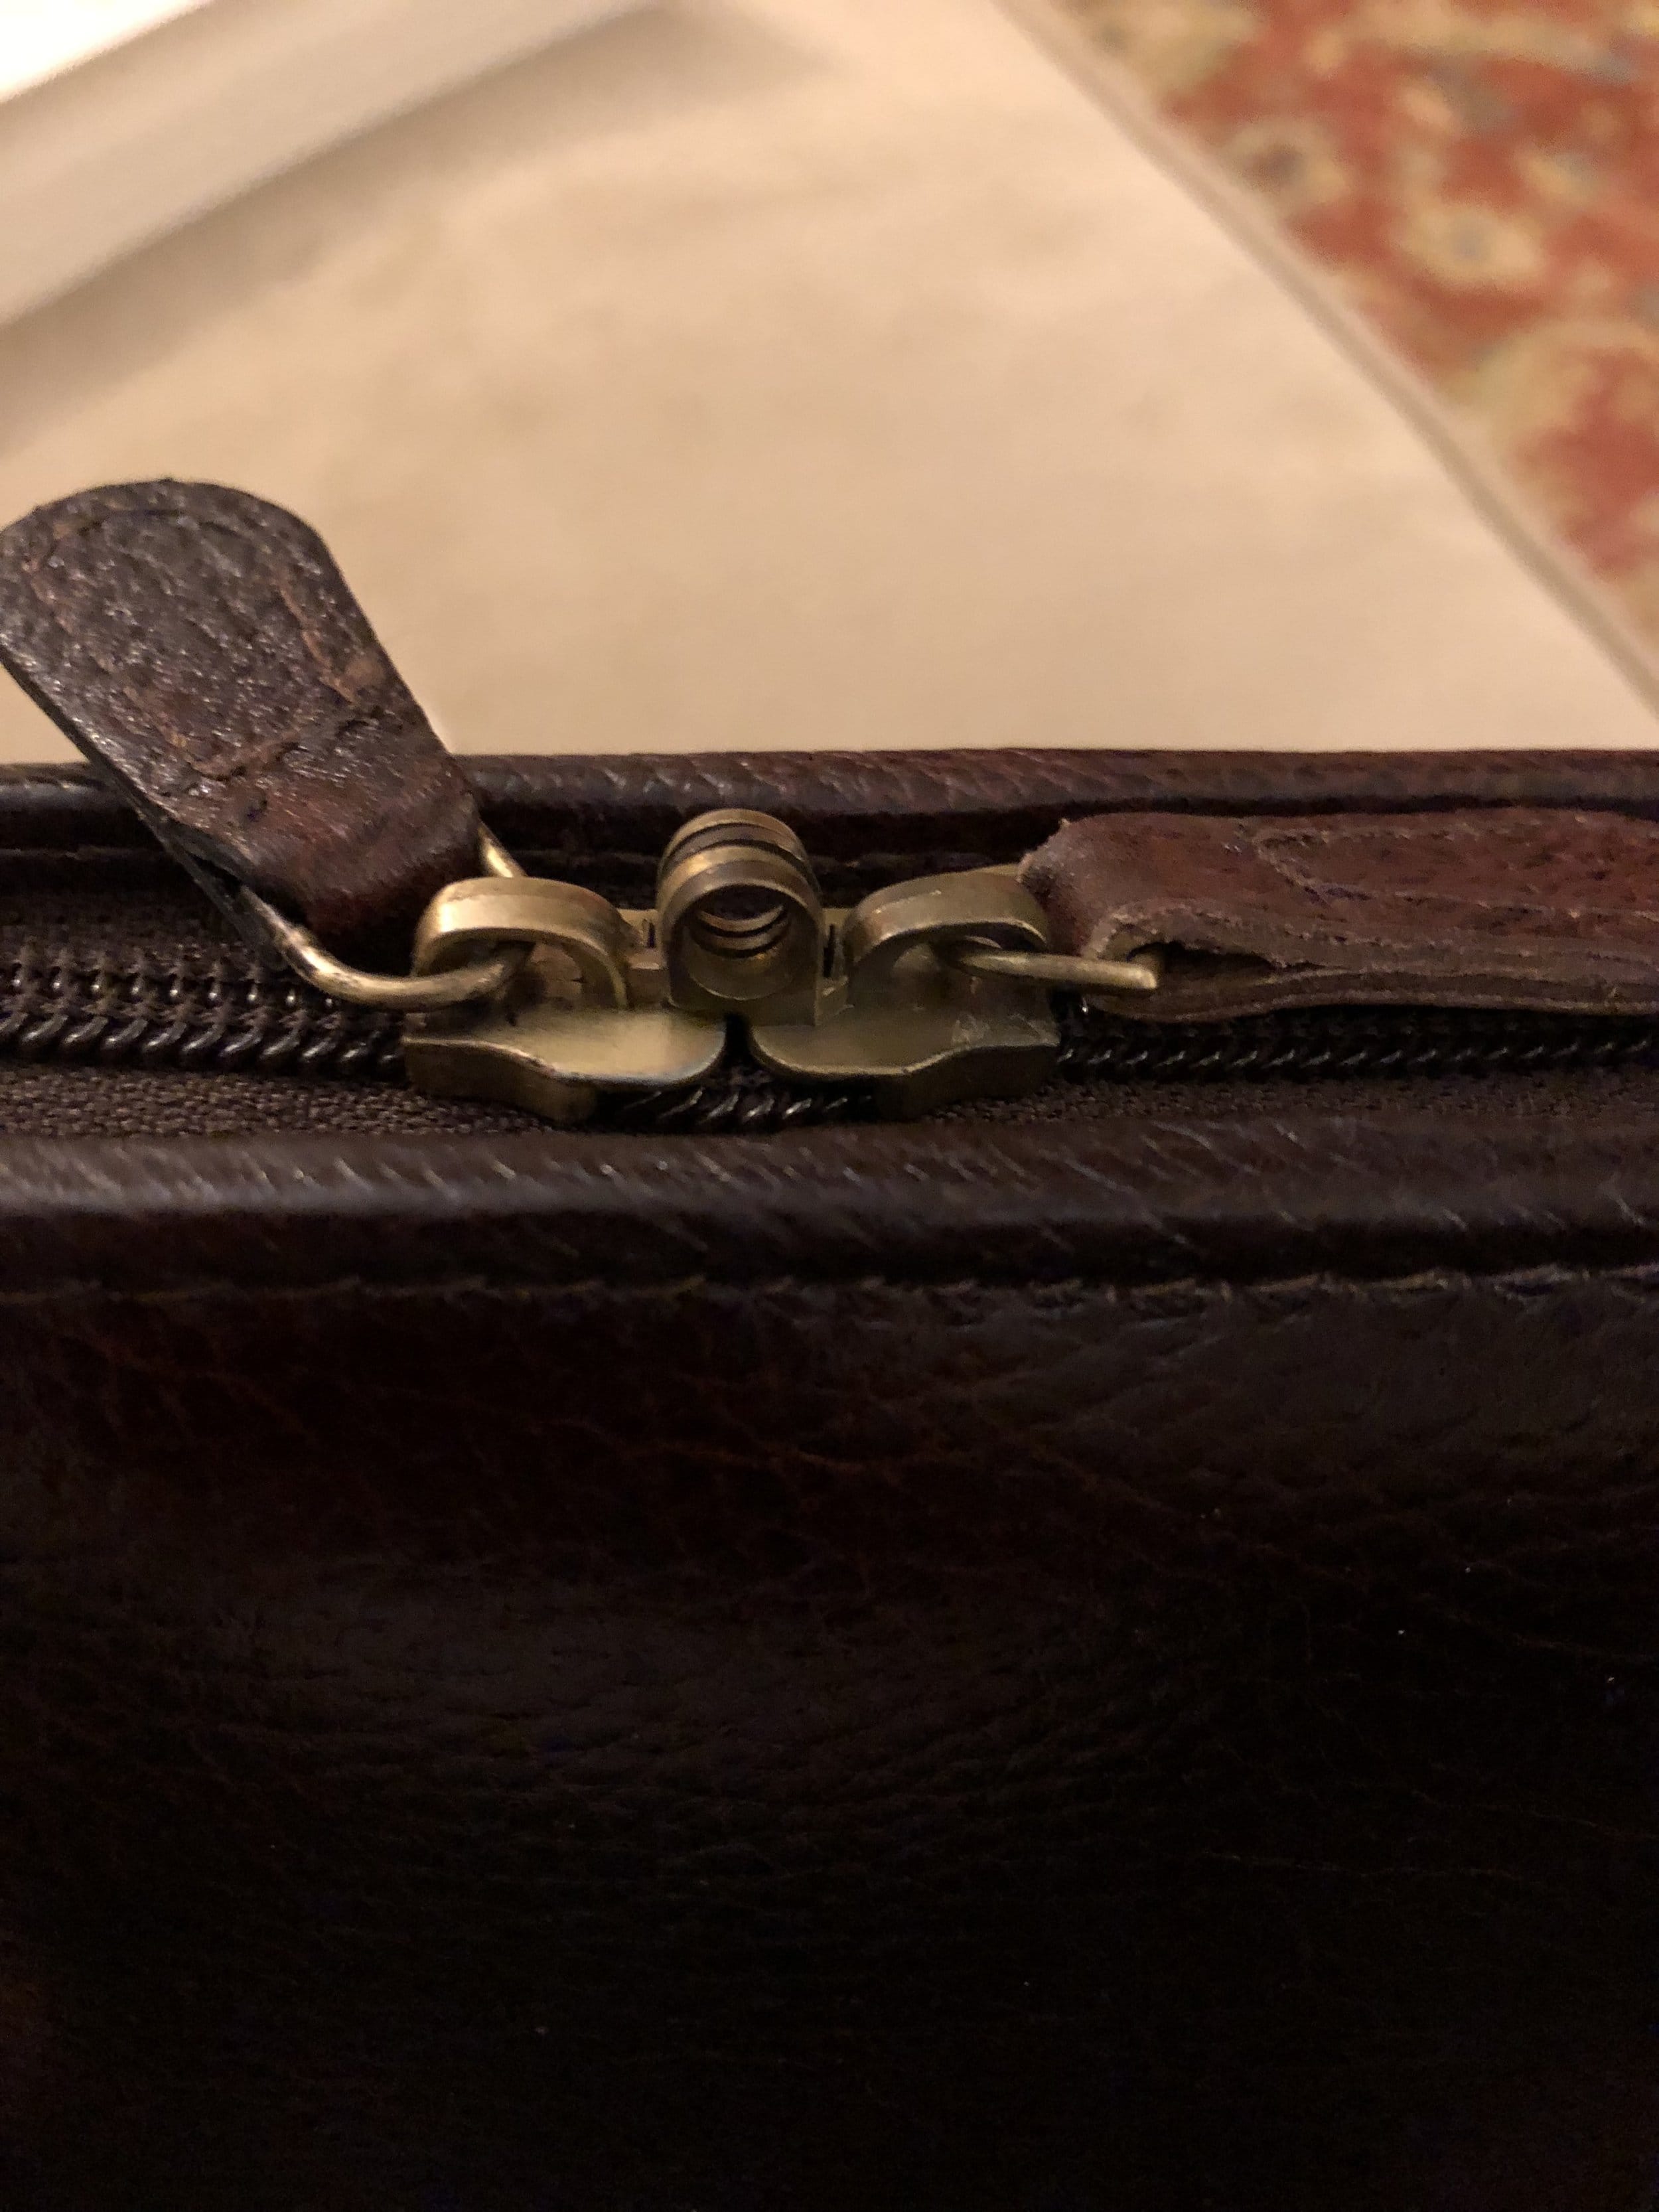 Review: Yak Leather Pen Case - Seize the Dave